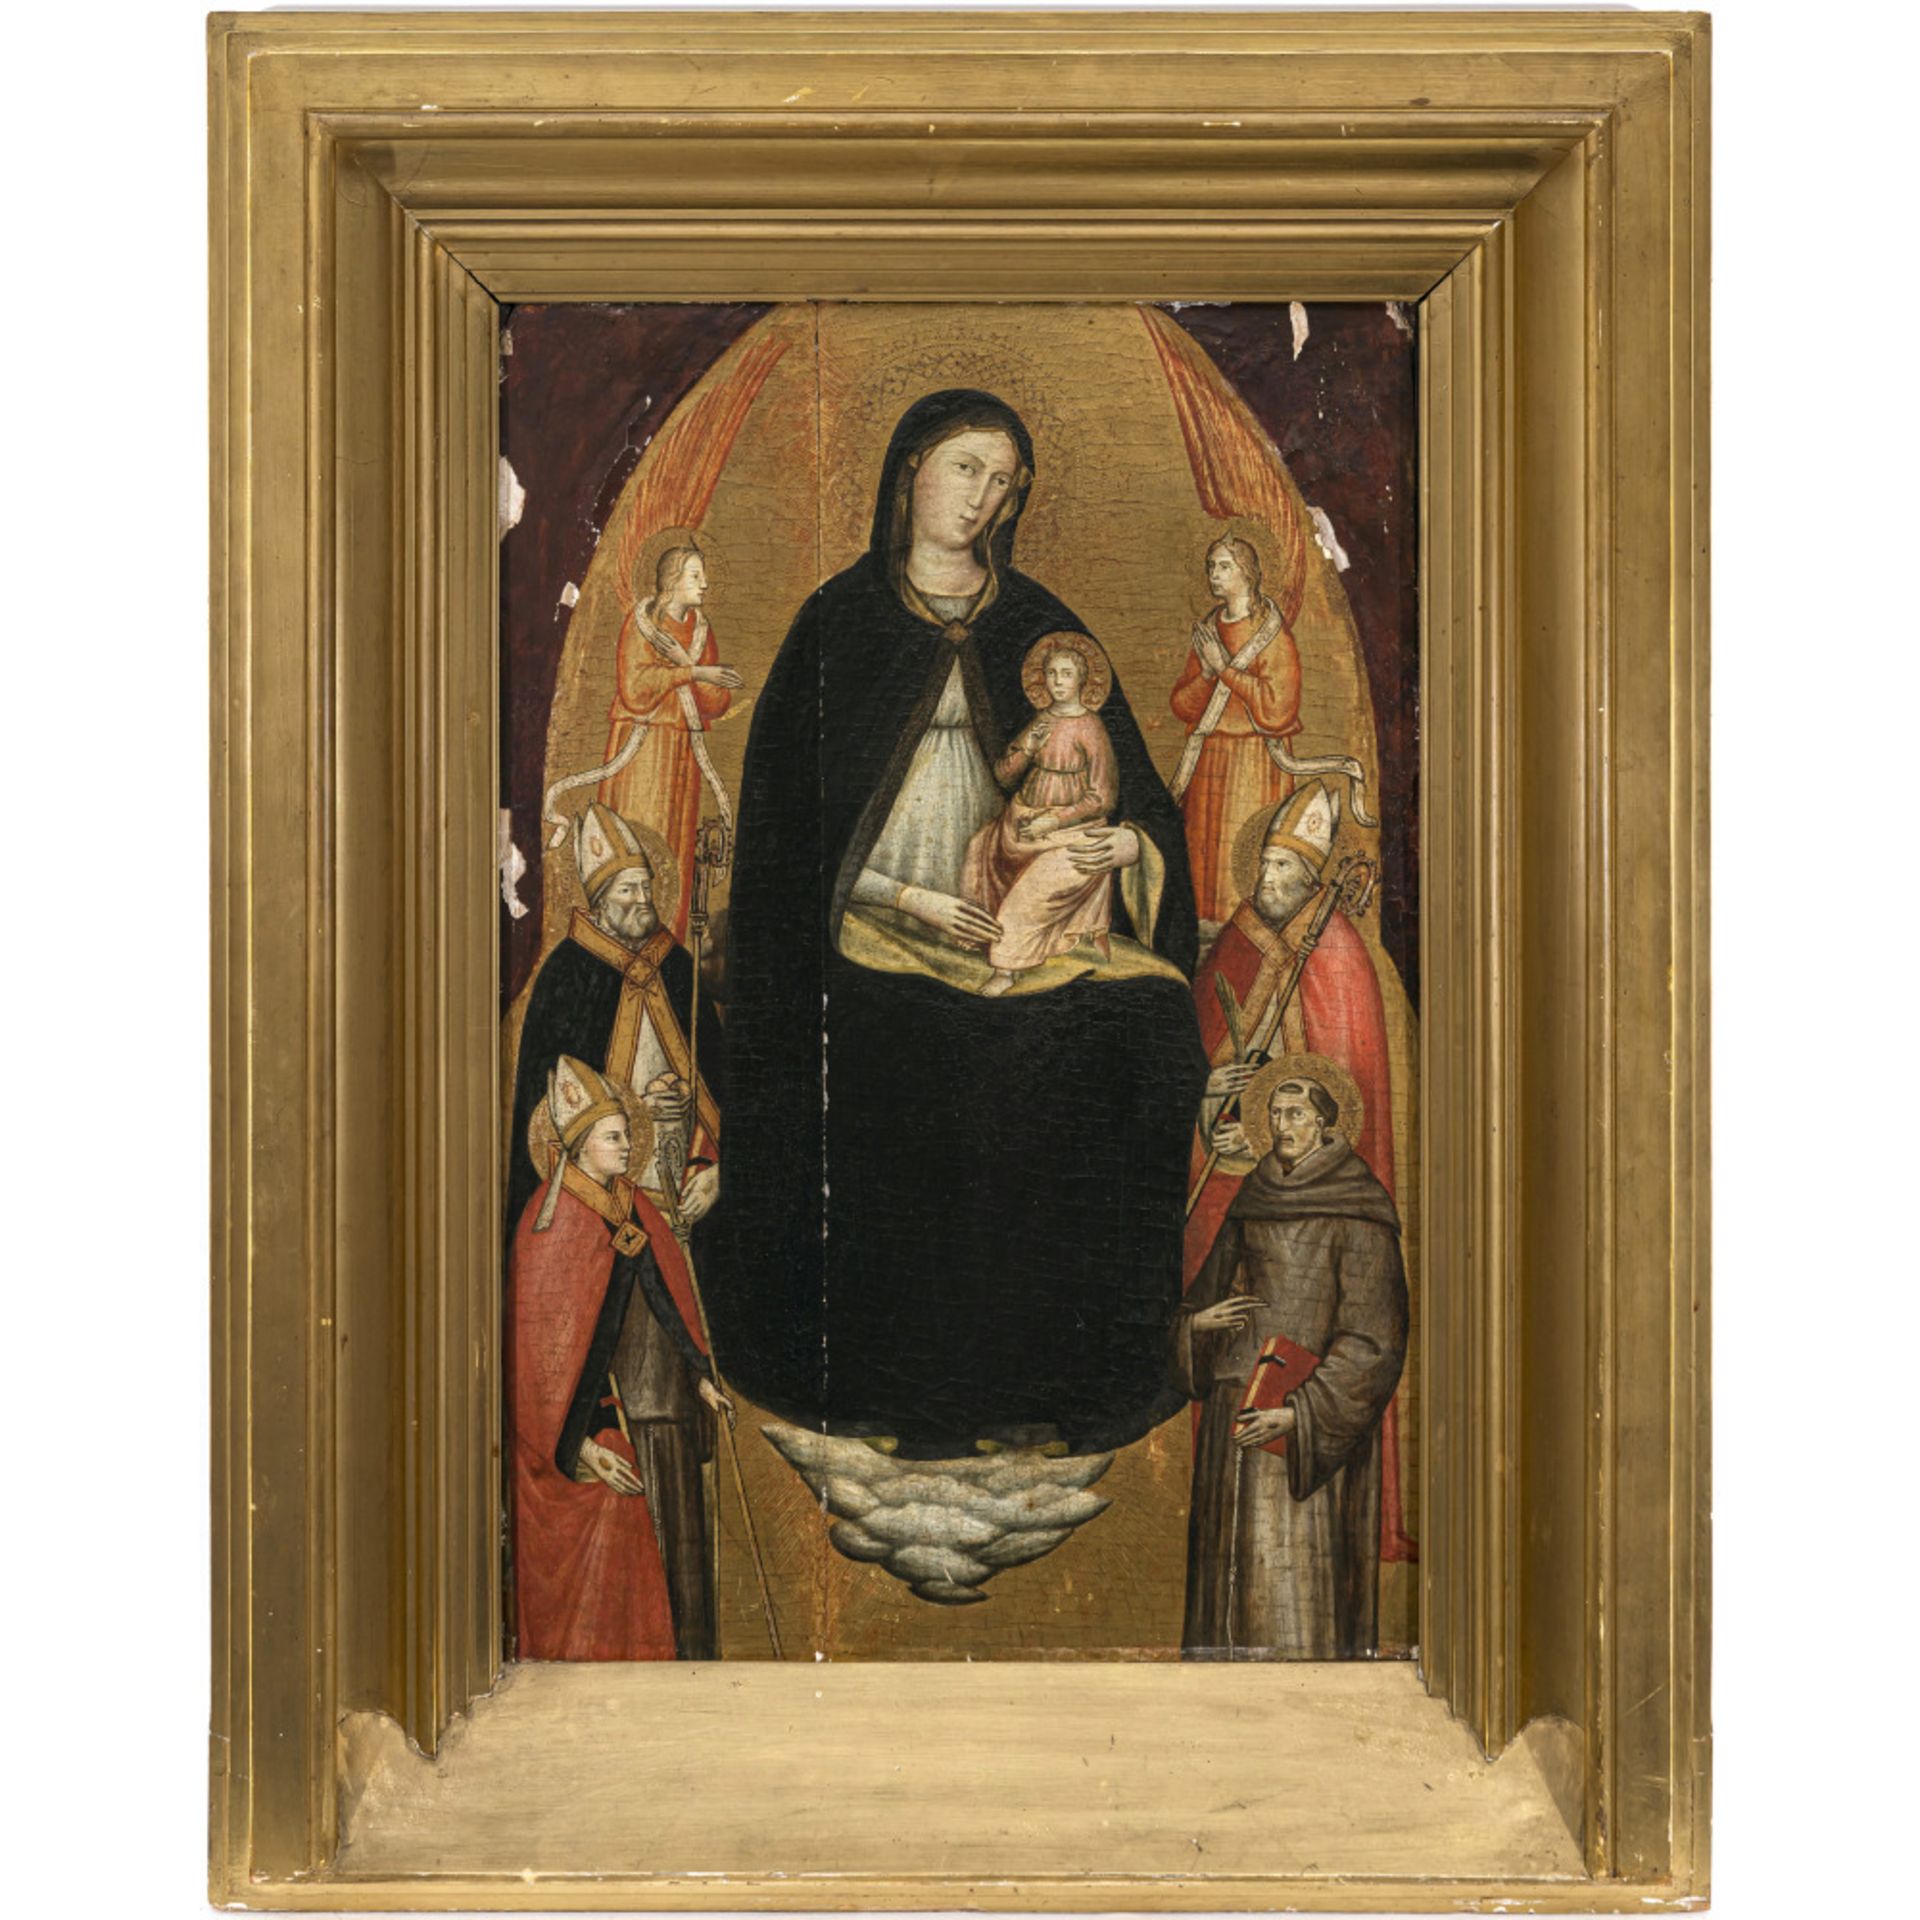 Italien Late 14th century / early 15th century - Mary with Child and saints - Image 2 of 3